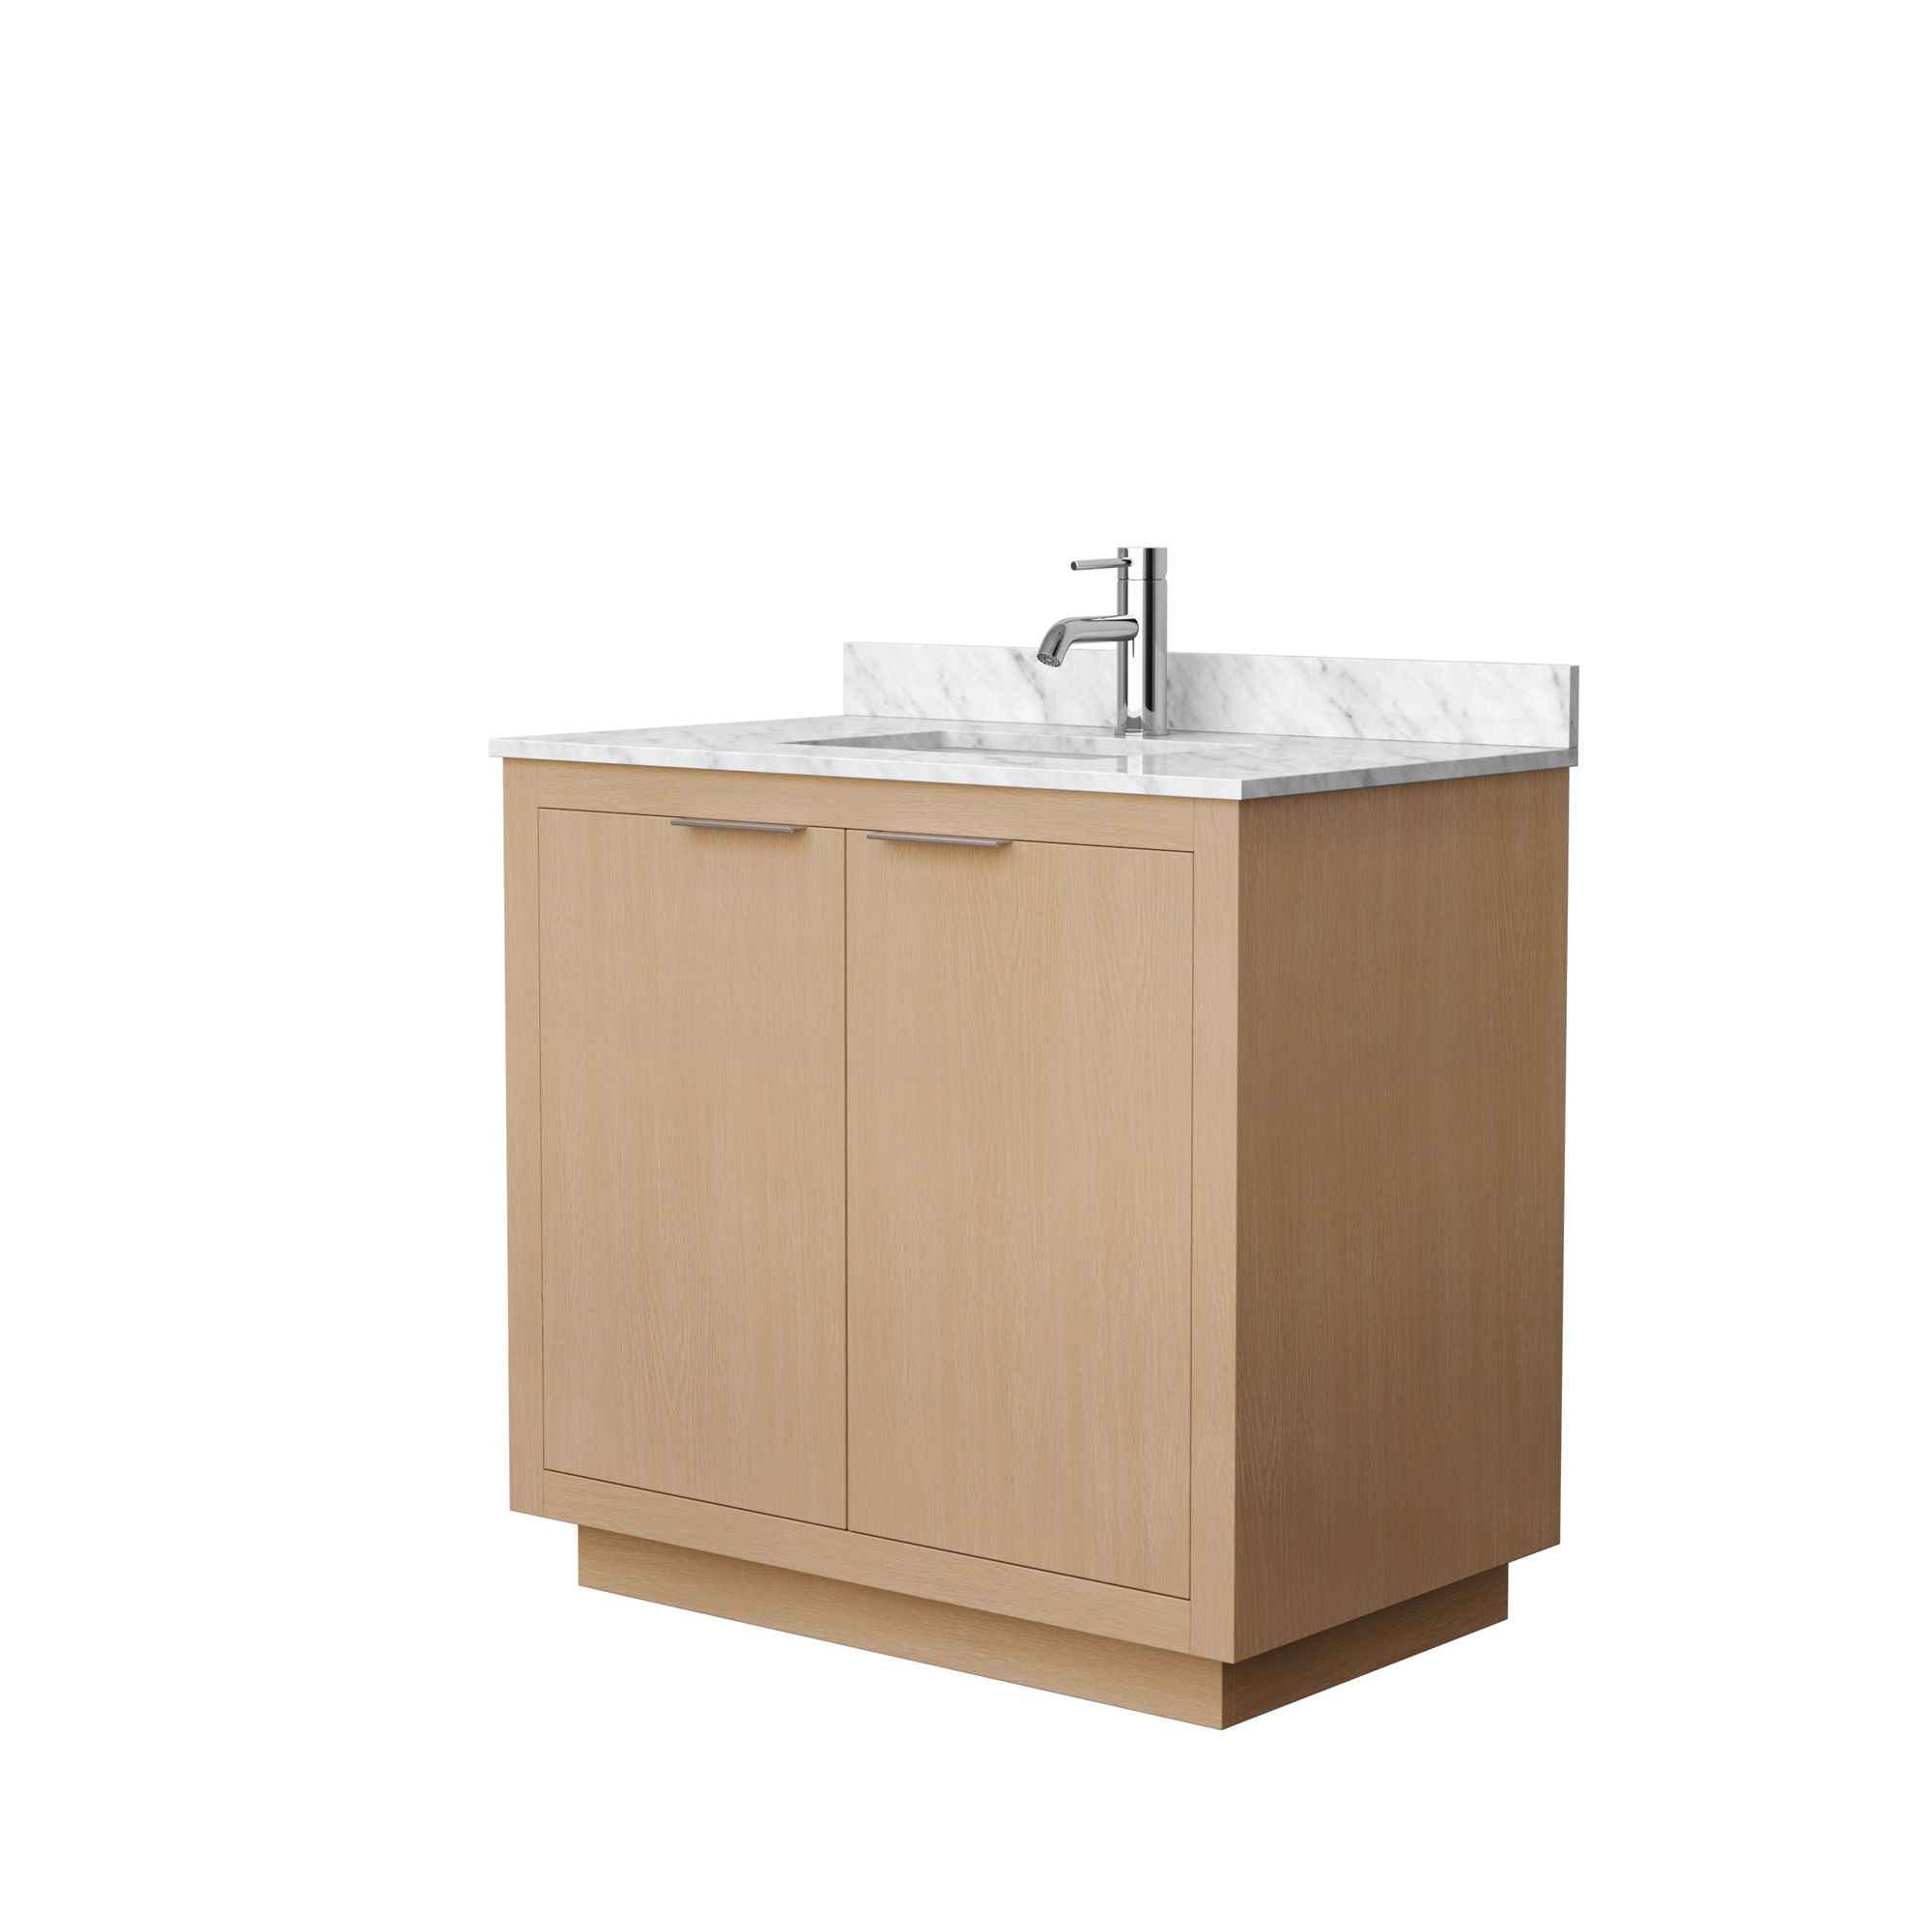 36" Single Bathroom Vanity in Light Straw with Countertop and Hardware Options